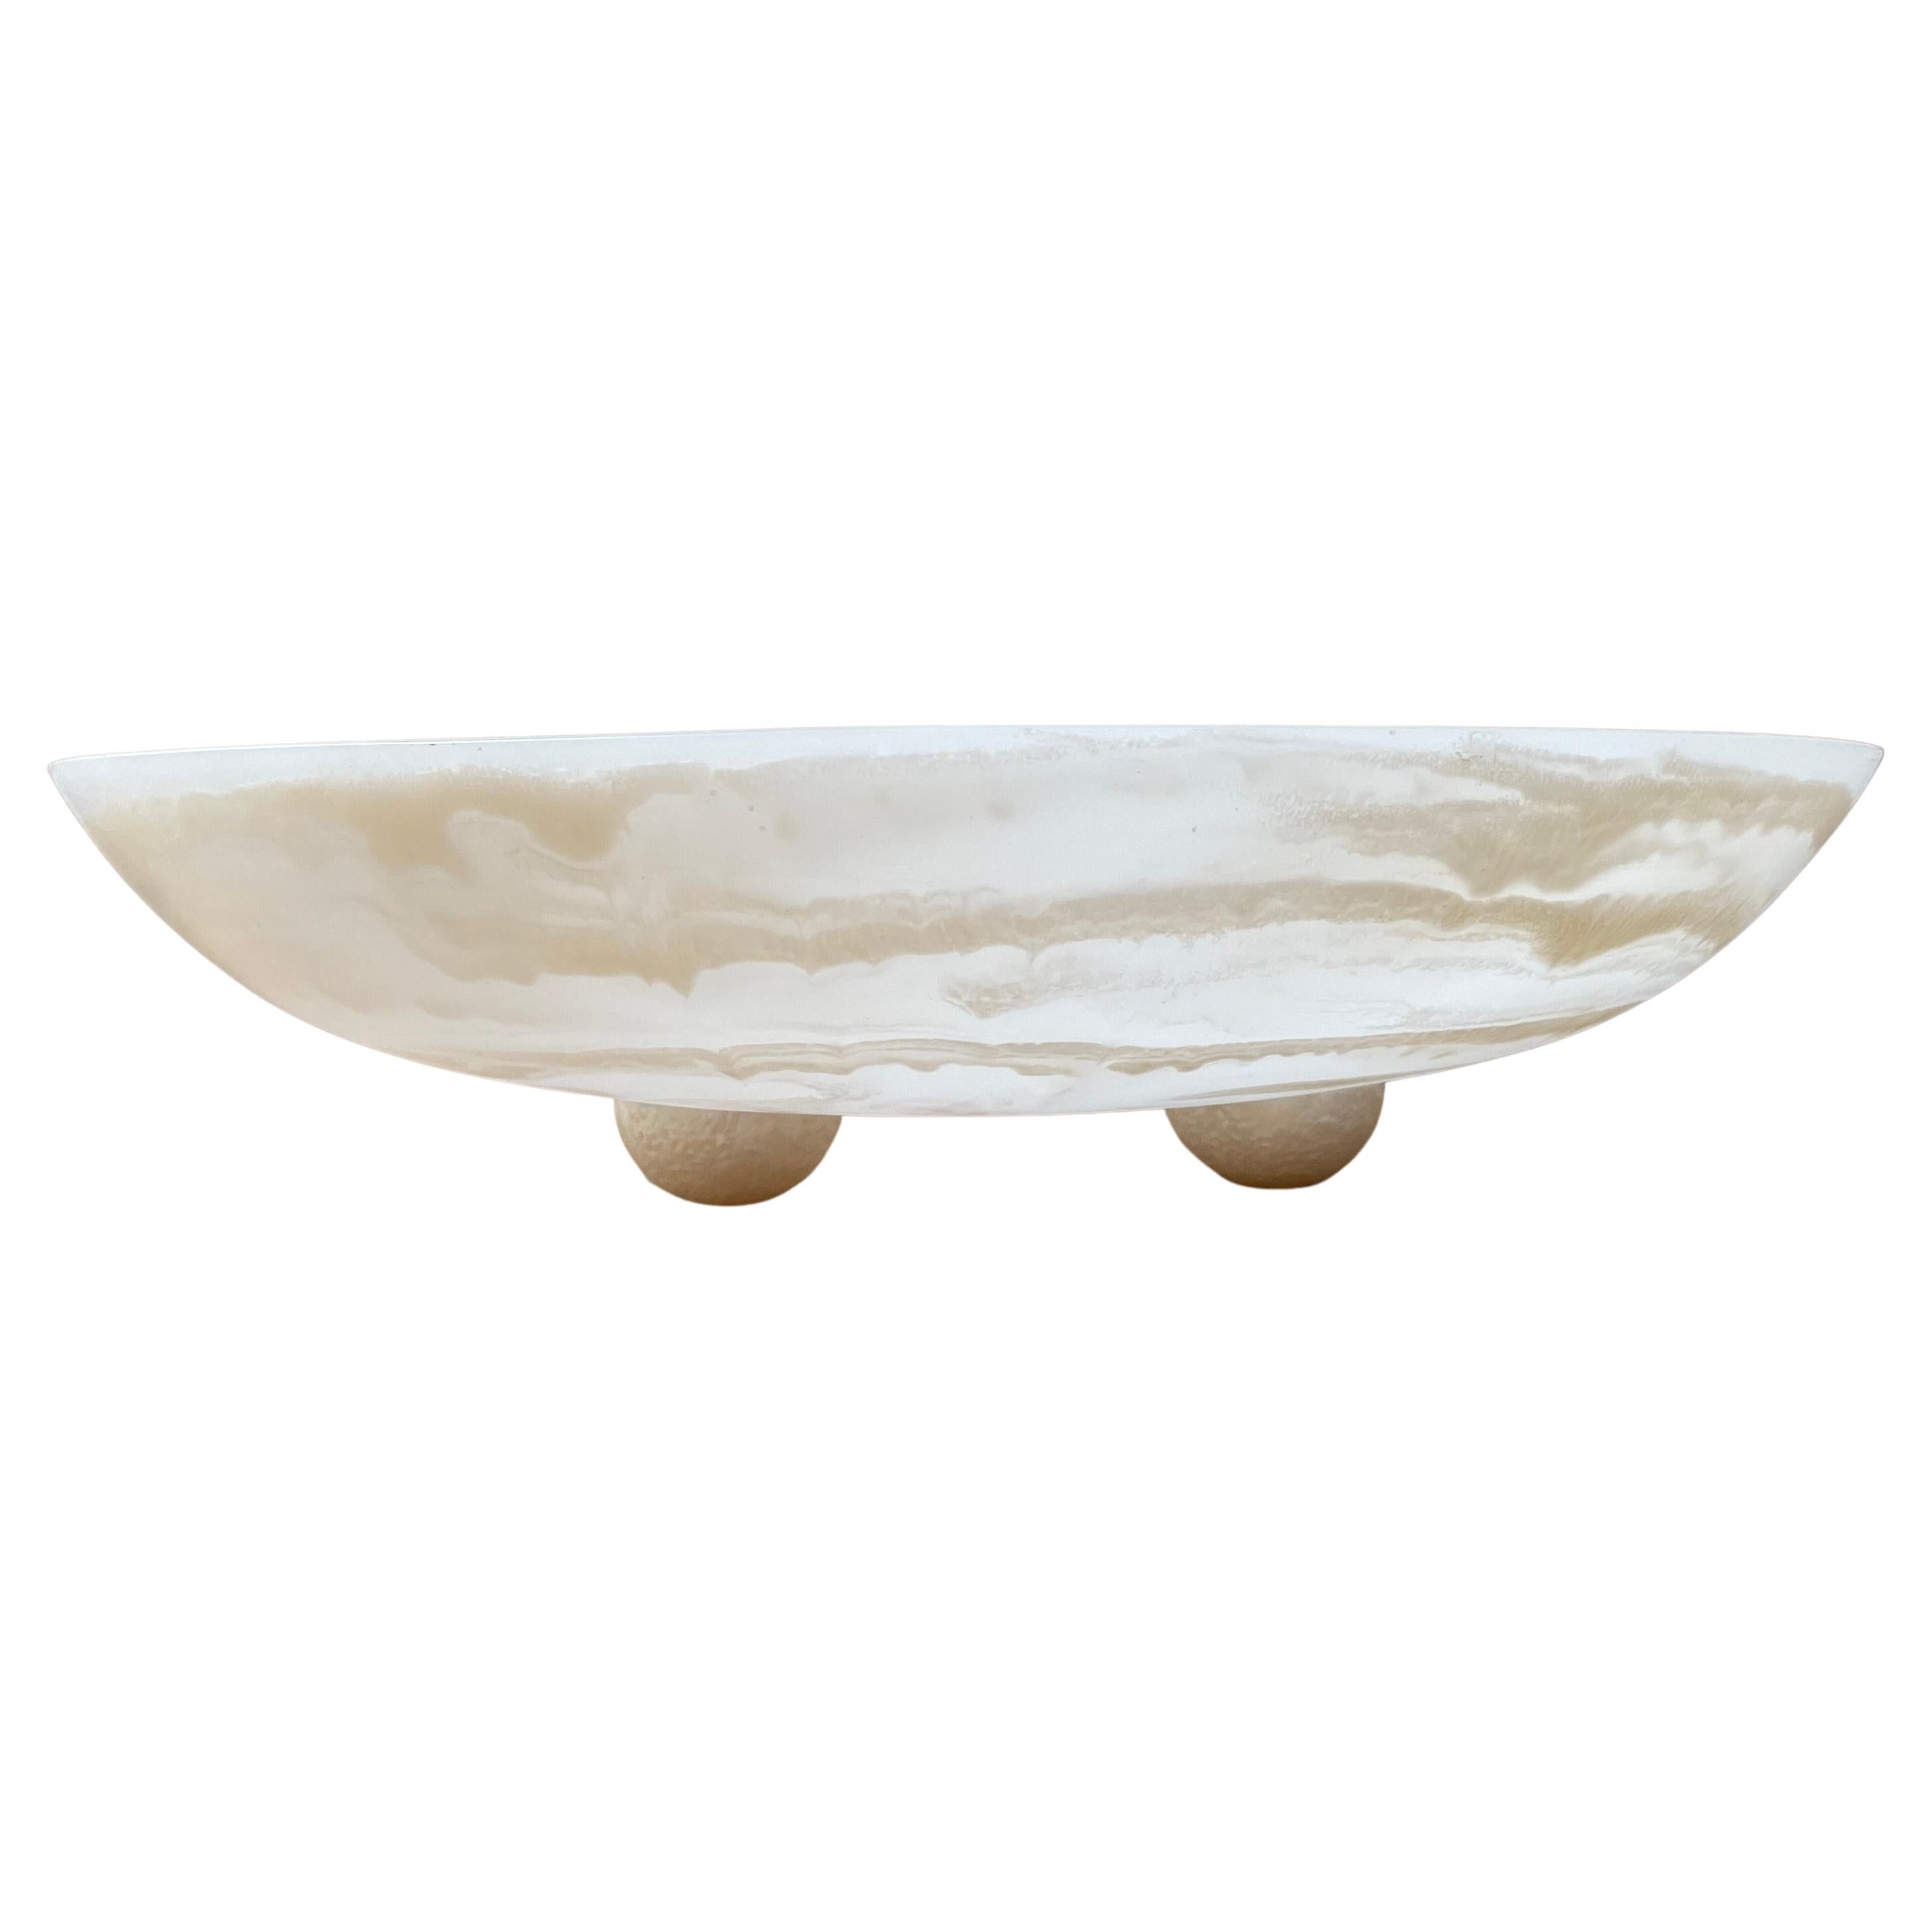 XL Footed Resin Bowl Centerpiece in White and Pearl by Paola Valle For Sale